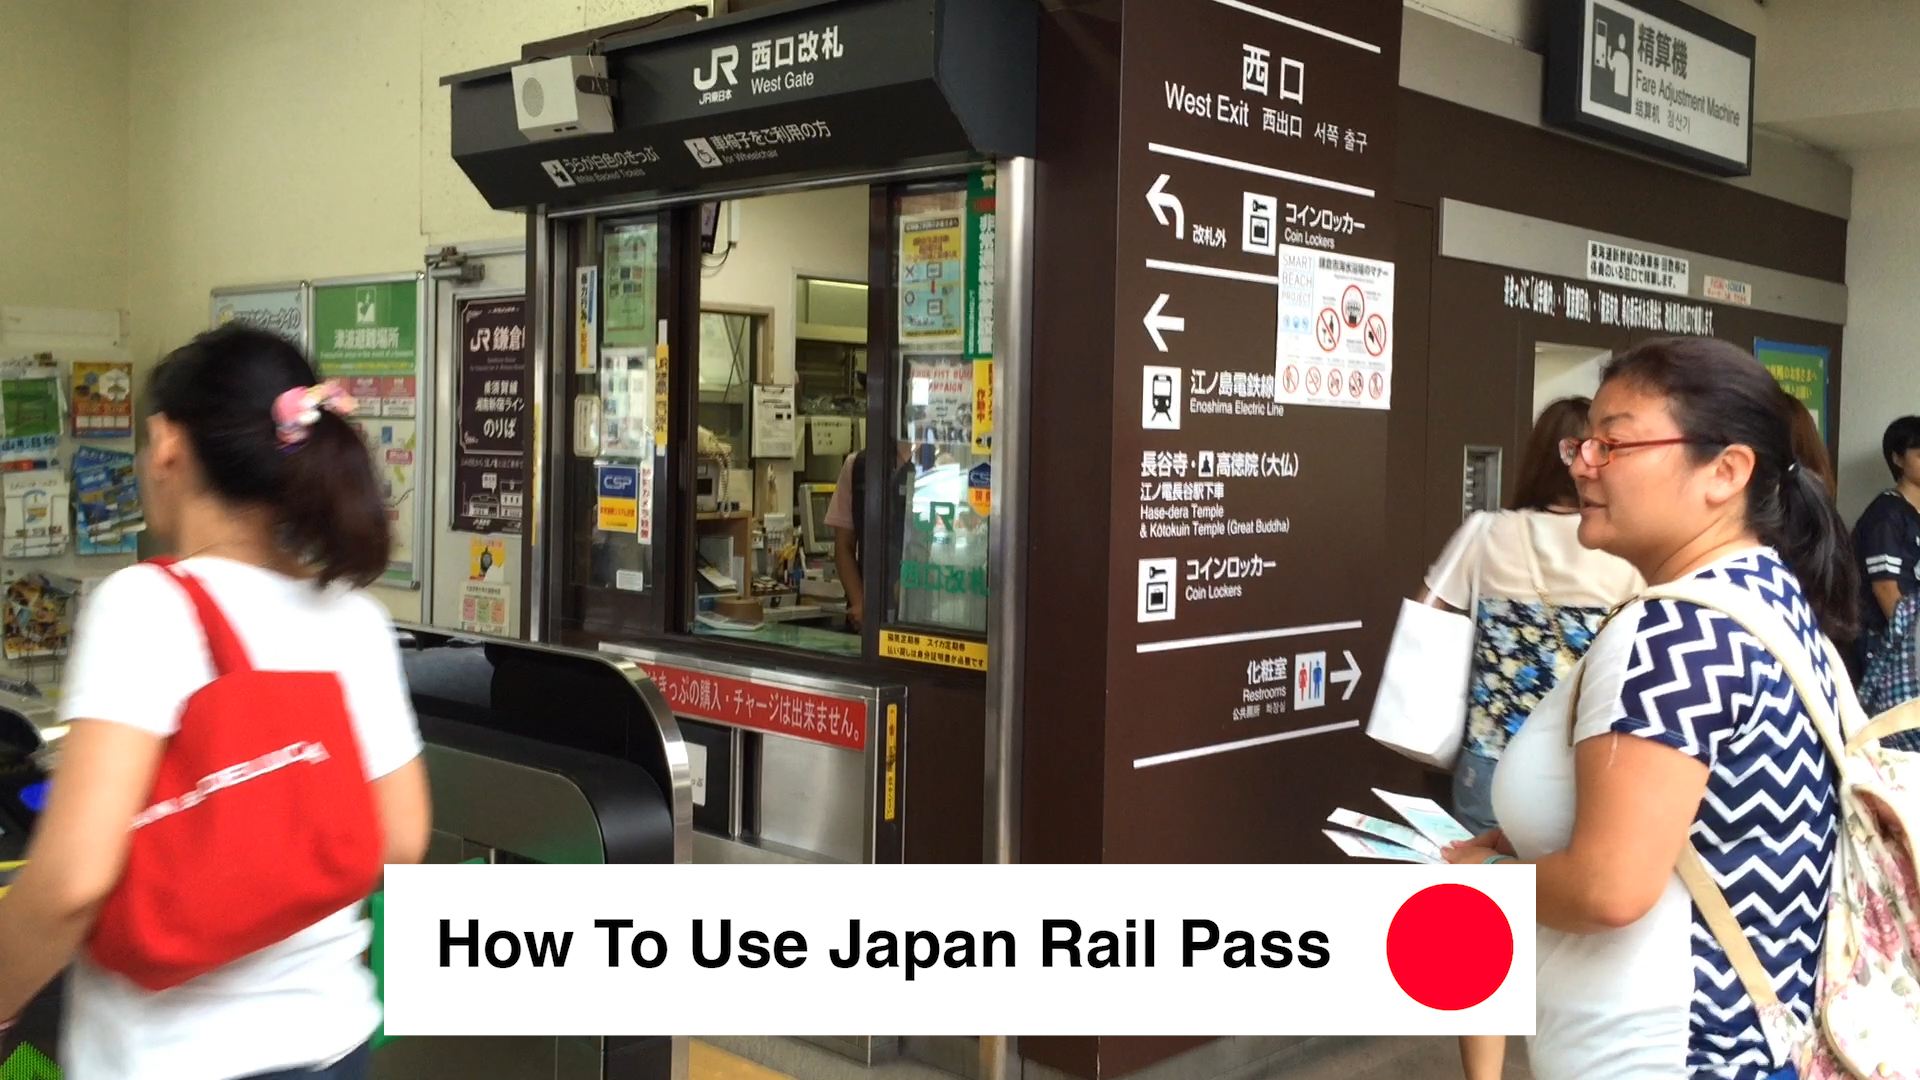 How To Use Japan Rail Pass - Where To Buy Japan Rail Pass How To Use JR Pass In Tokyo. JR Pass Price